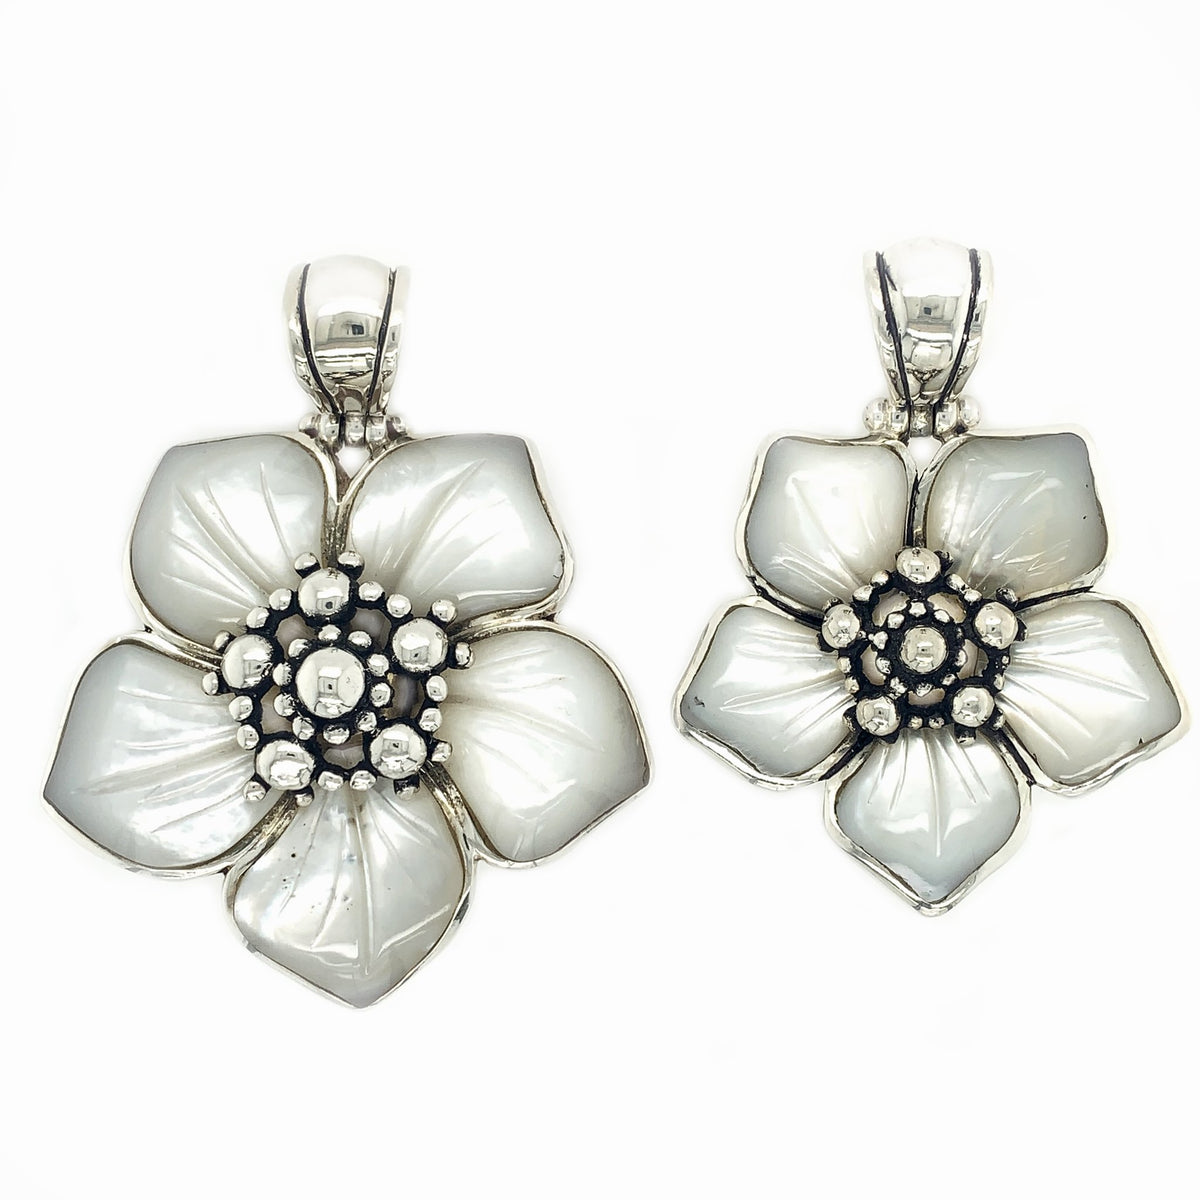 Sterling Silver &amp; Carved Mother-of-Pearl Flower Pendant - Qinti - The Peruvian Shop